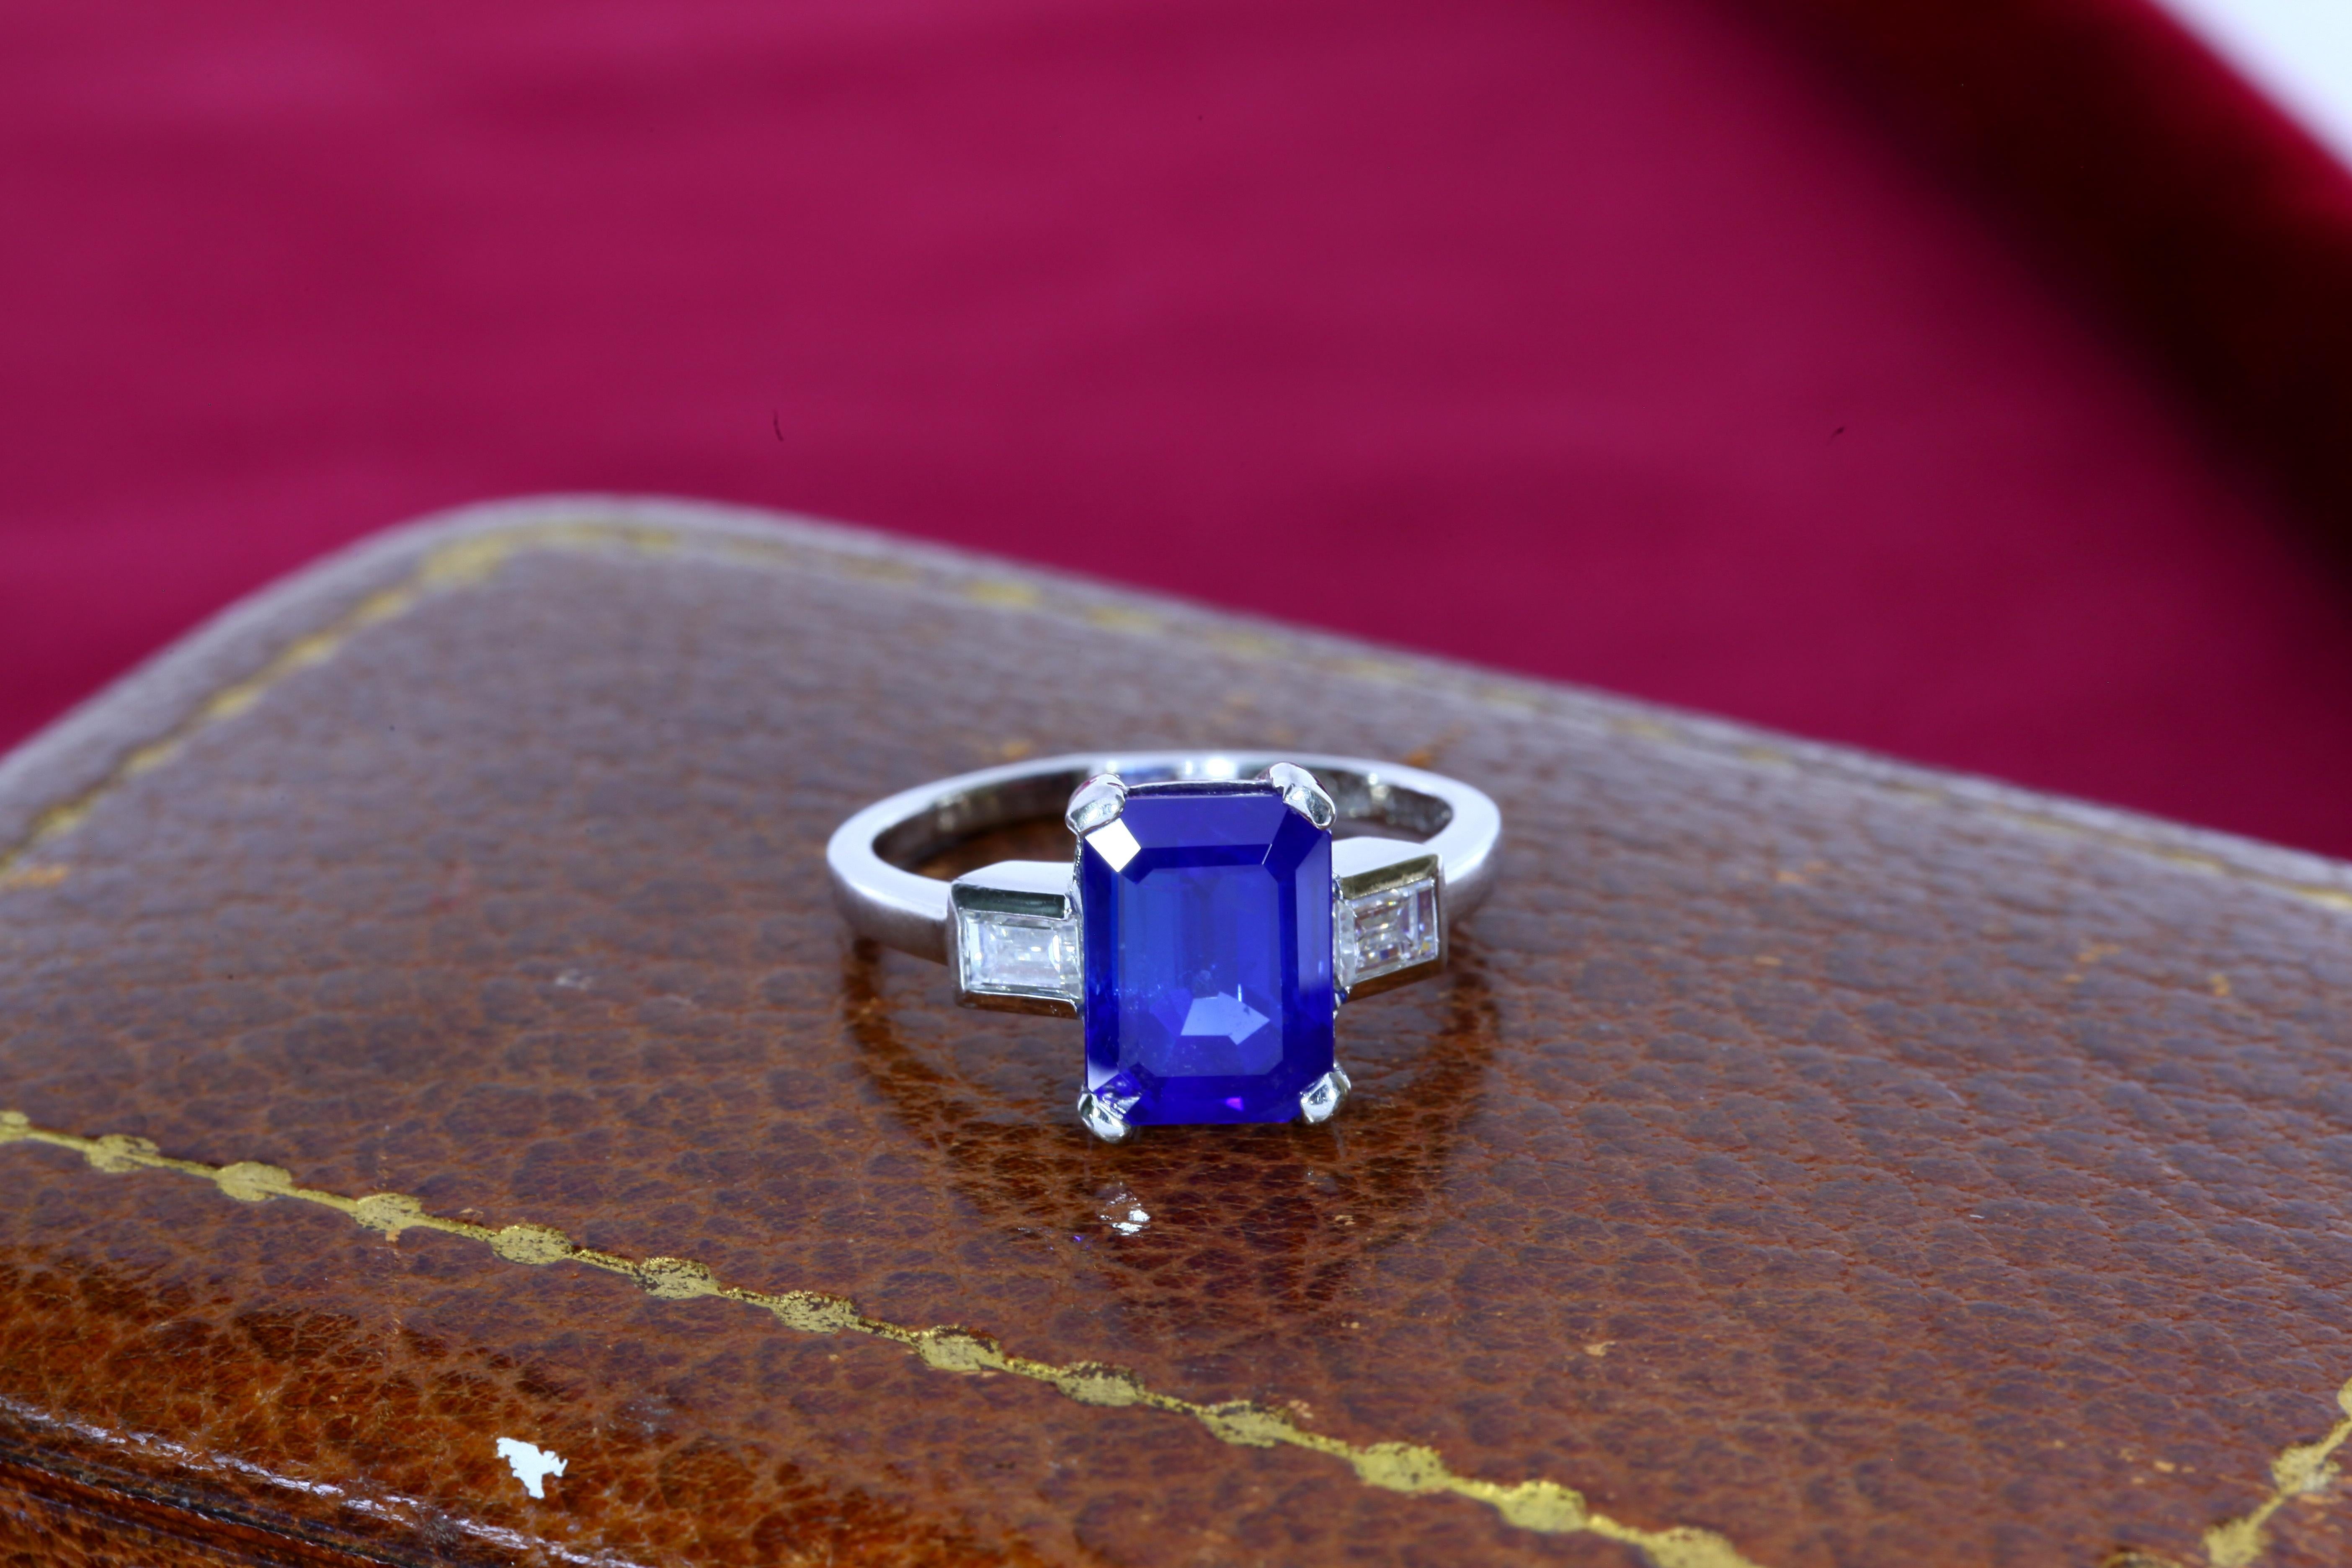 This untreated sapphire weighing 4.16 carats from the Kashmir region displays the velvet blue color typical of sapphires from this region. The sapphire is flanked by two baguette shaped diamonds and is mounted in a platinum ring. The center stone is